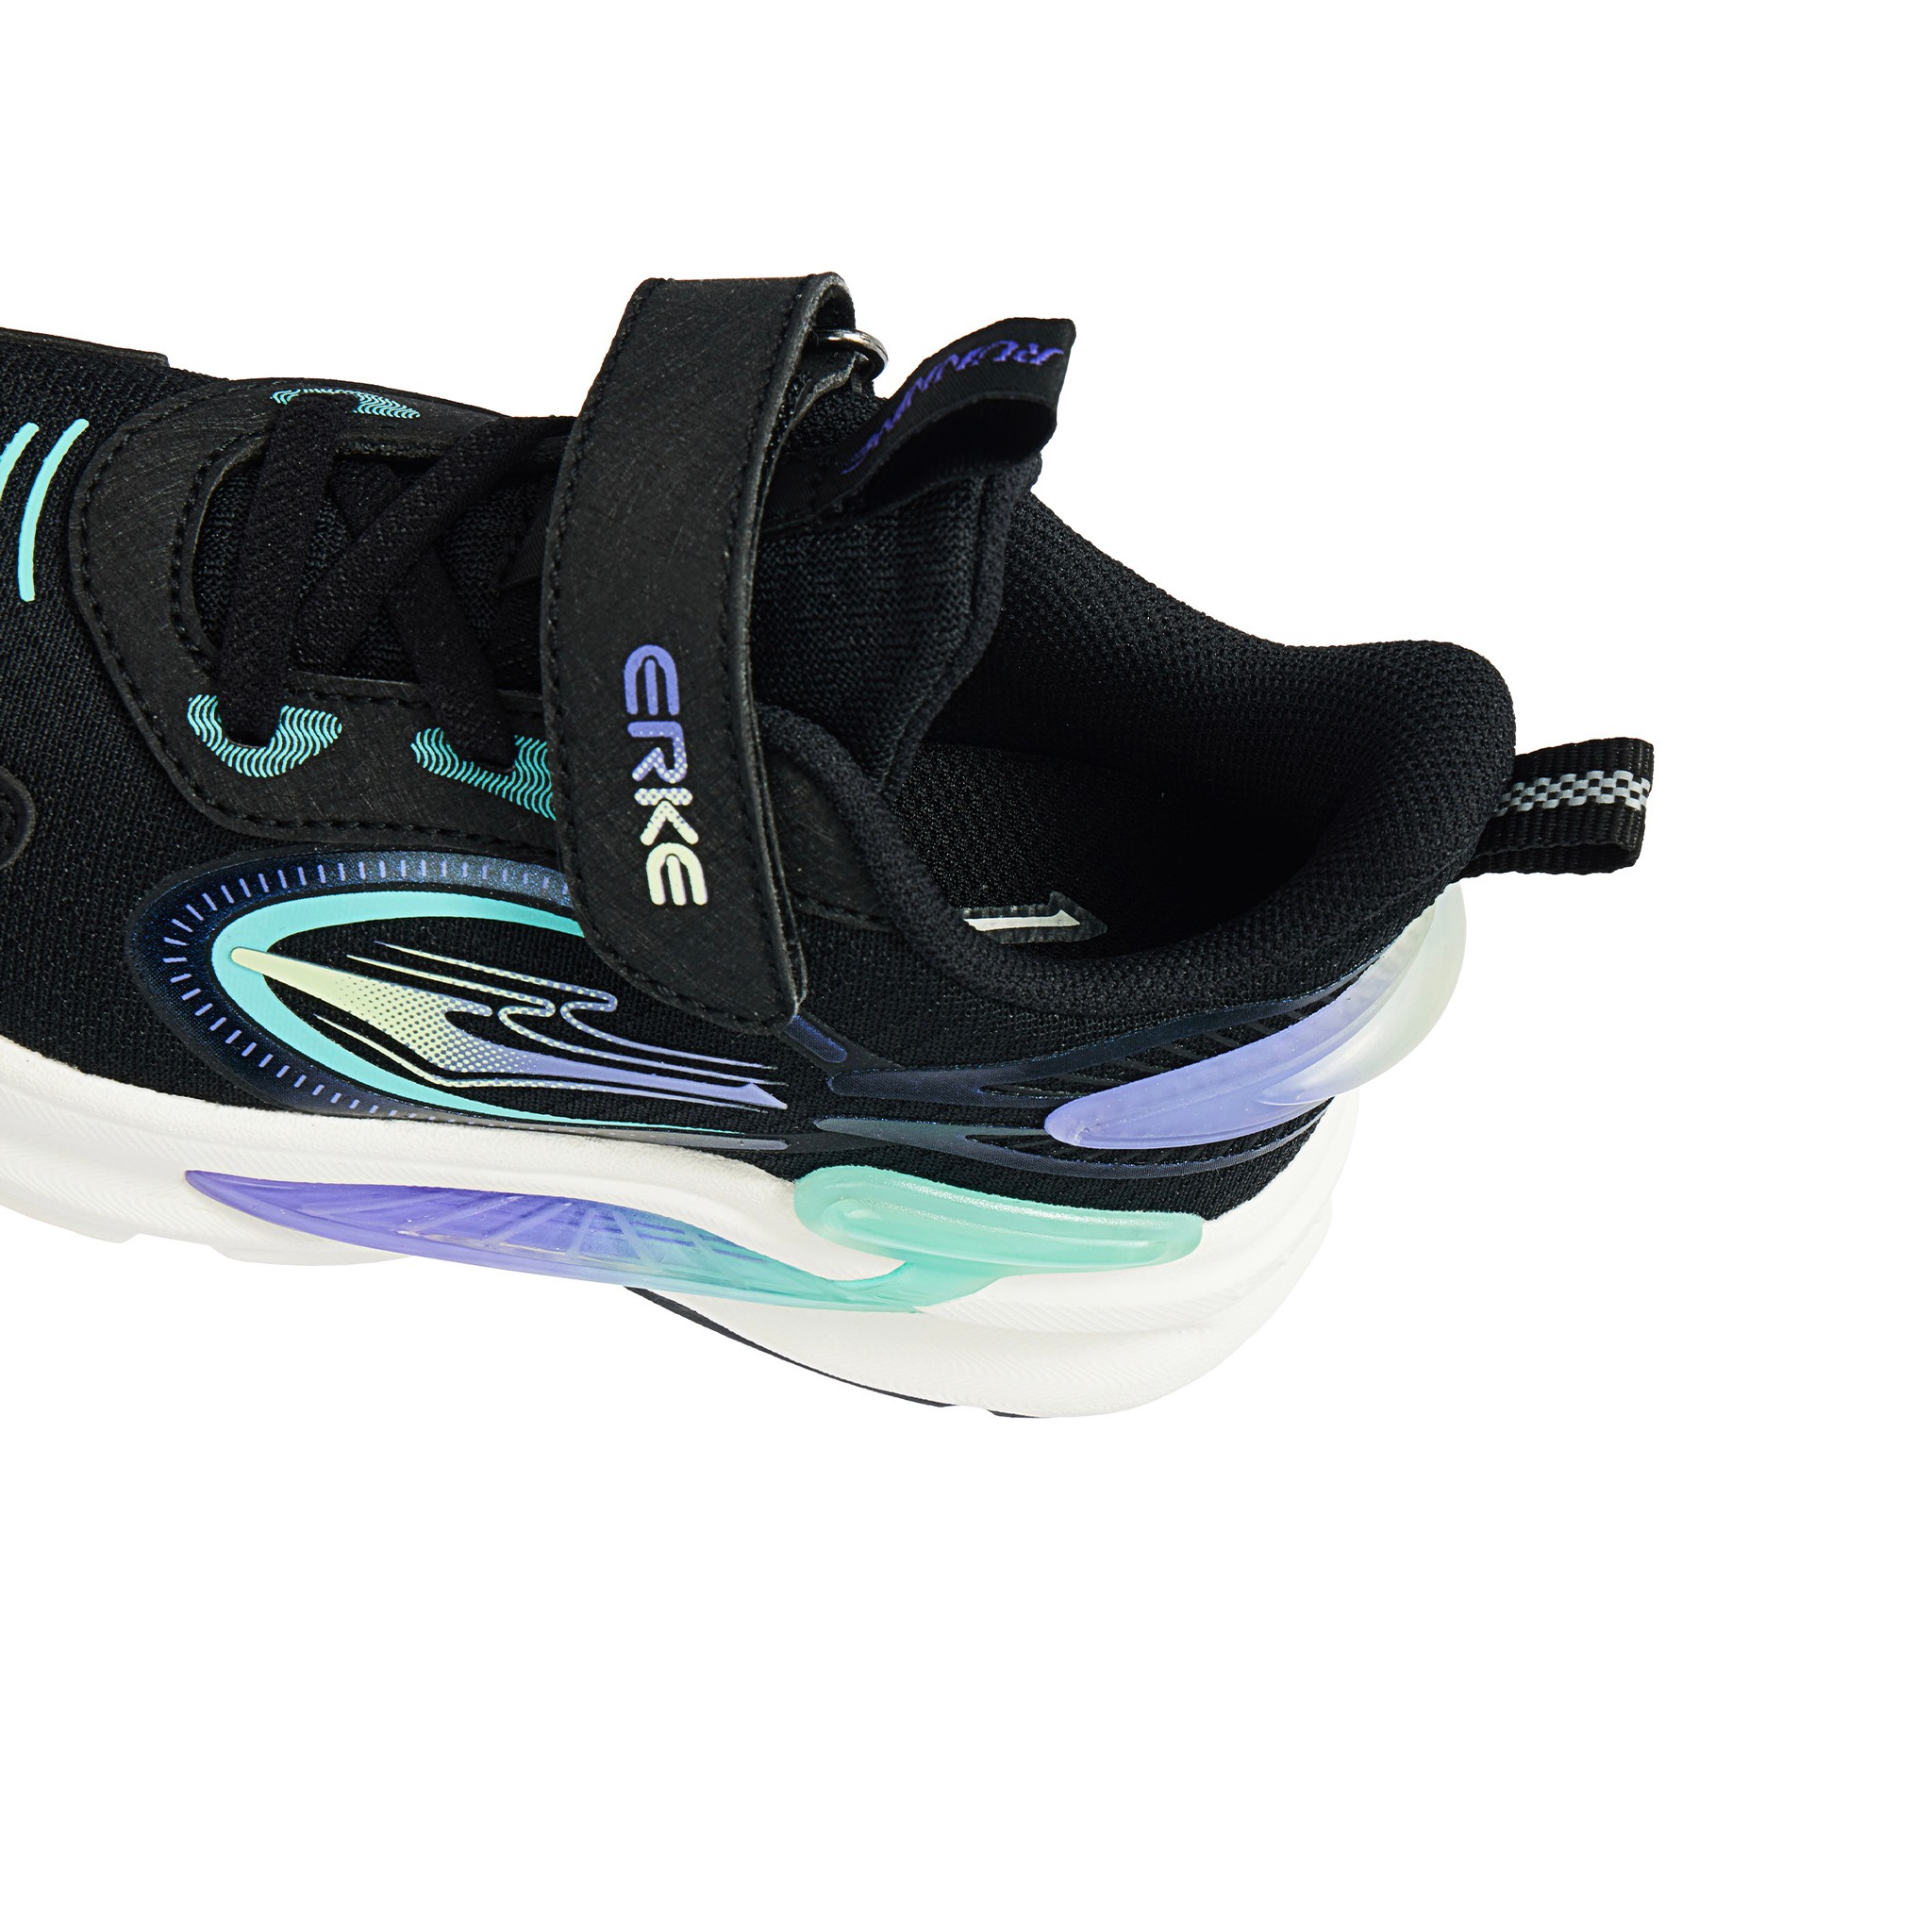 LB.Stability Running Shoes